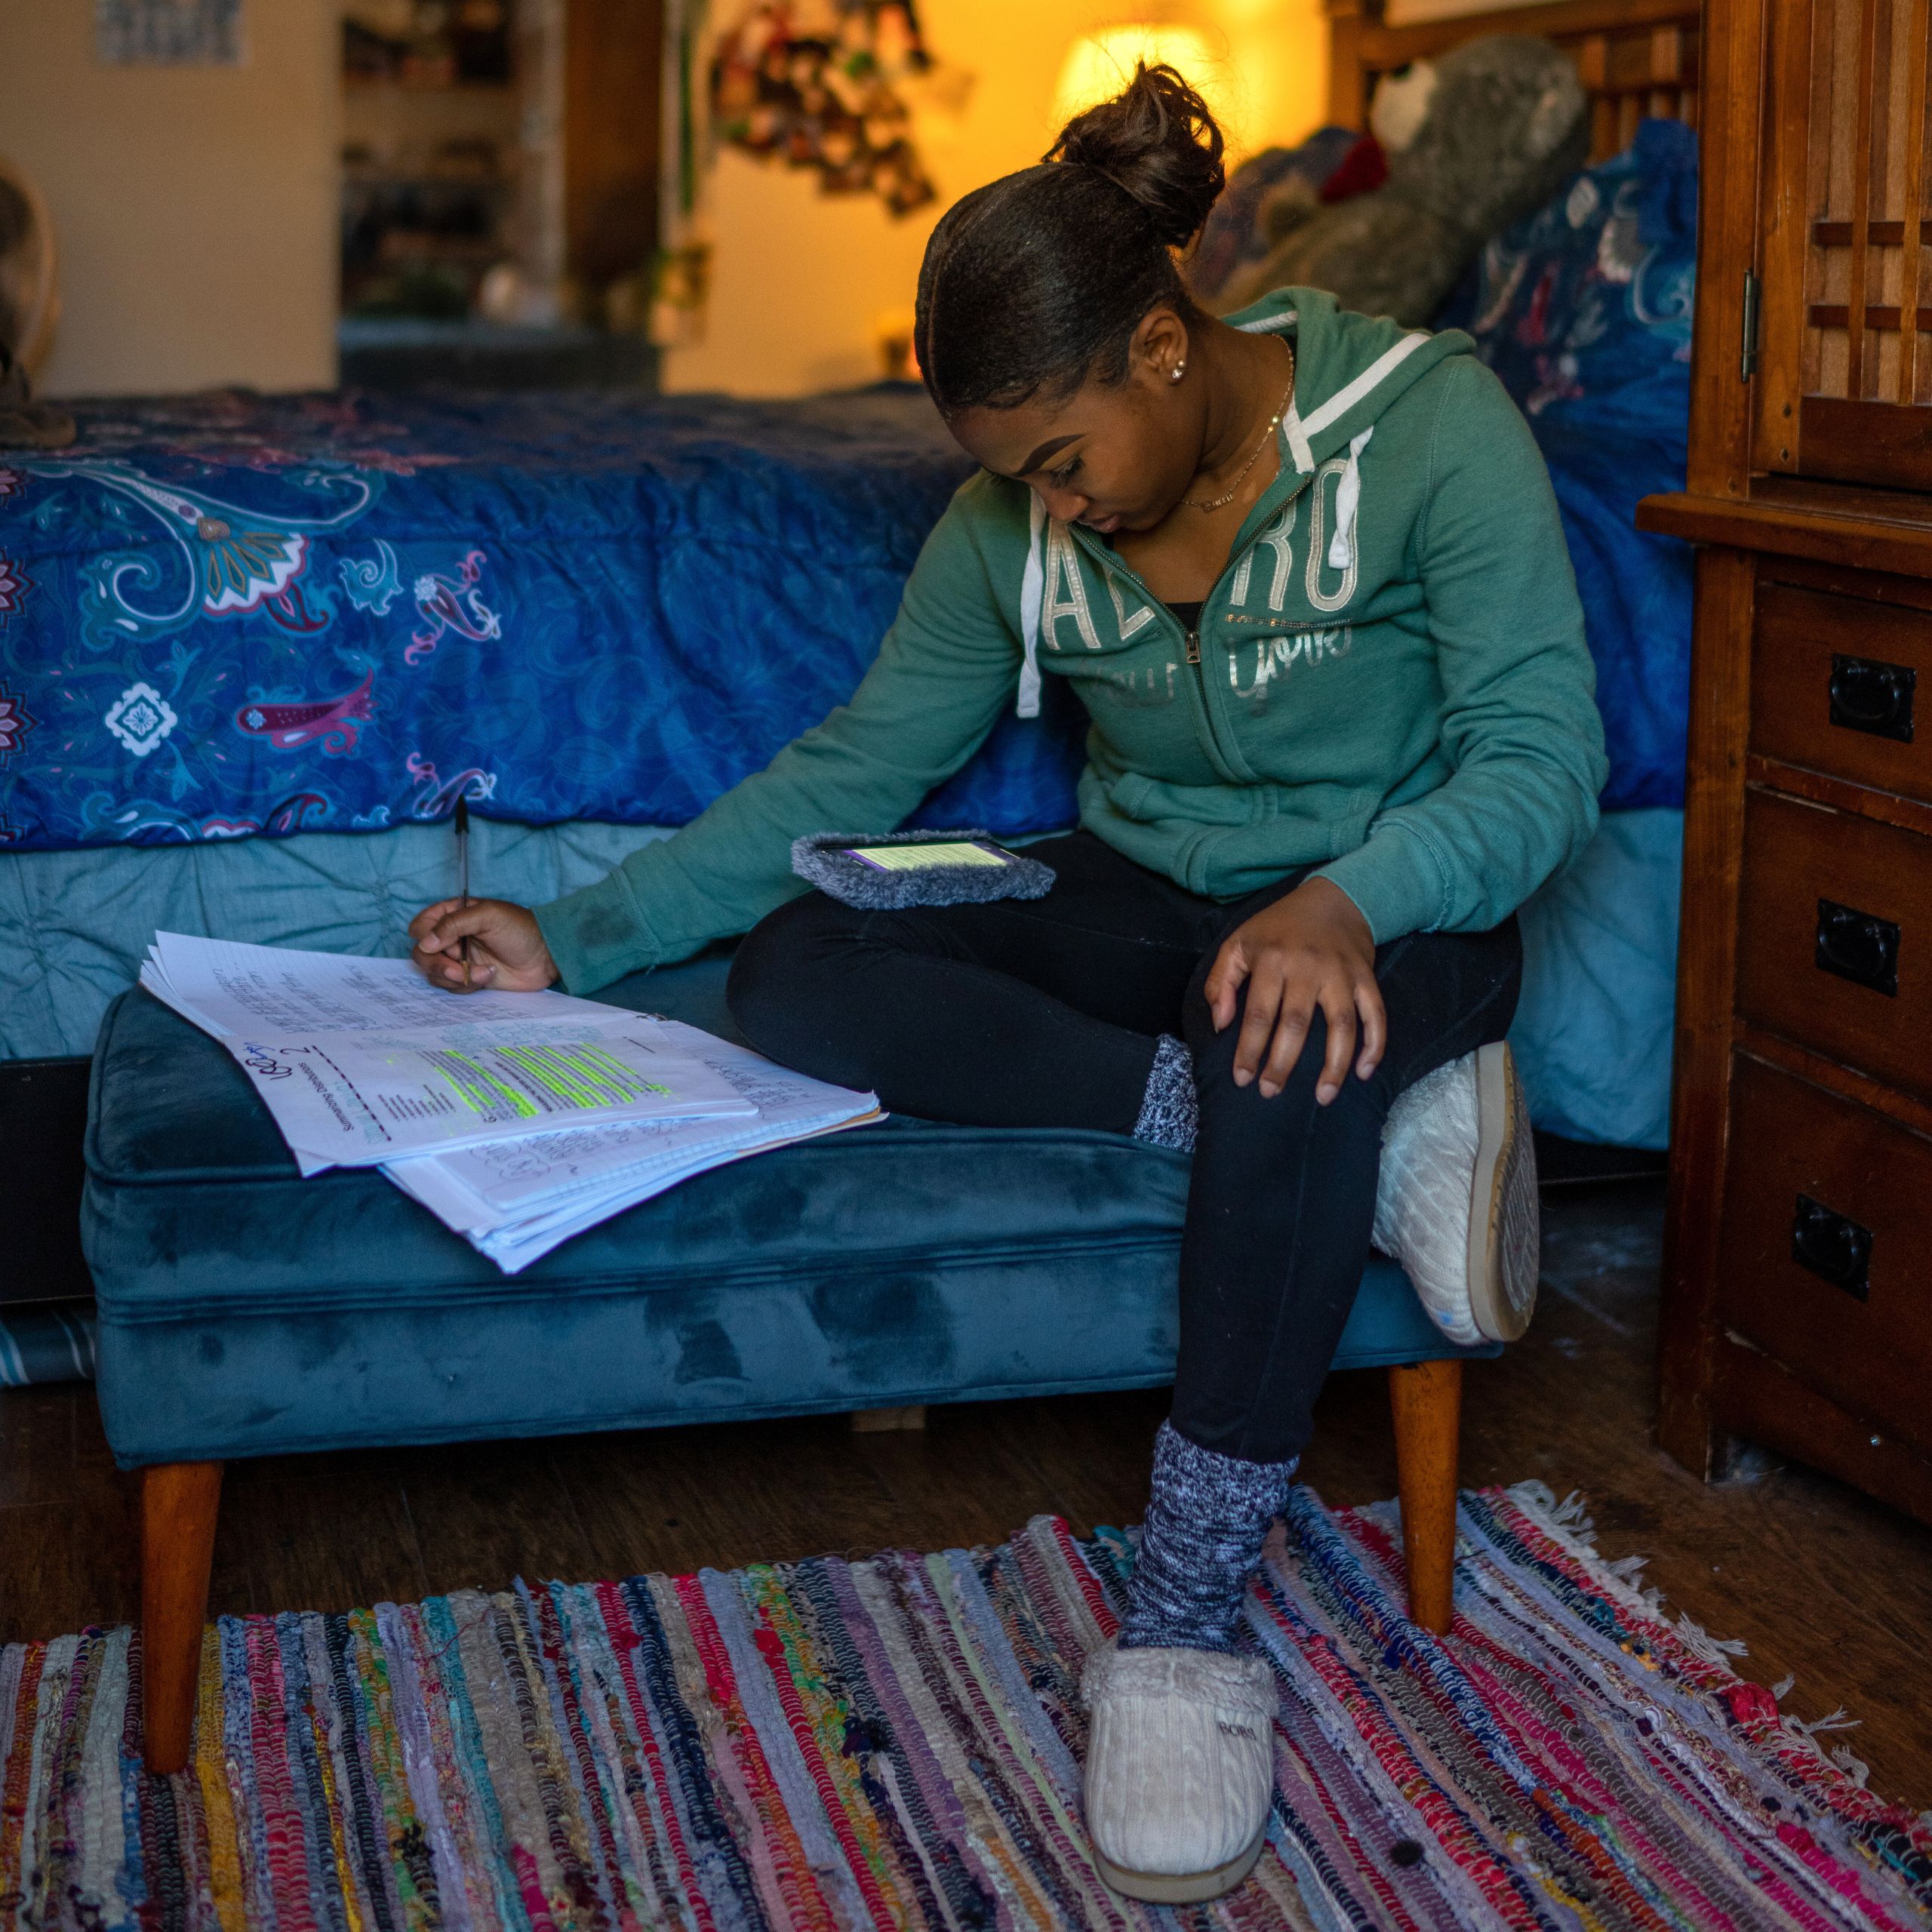 Satoriya Lambert does homework in her room after the coronavirus shuttered schools for the rest of the year in New Orleans. S